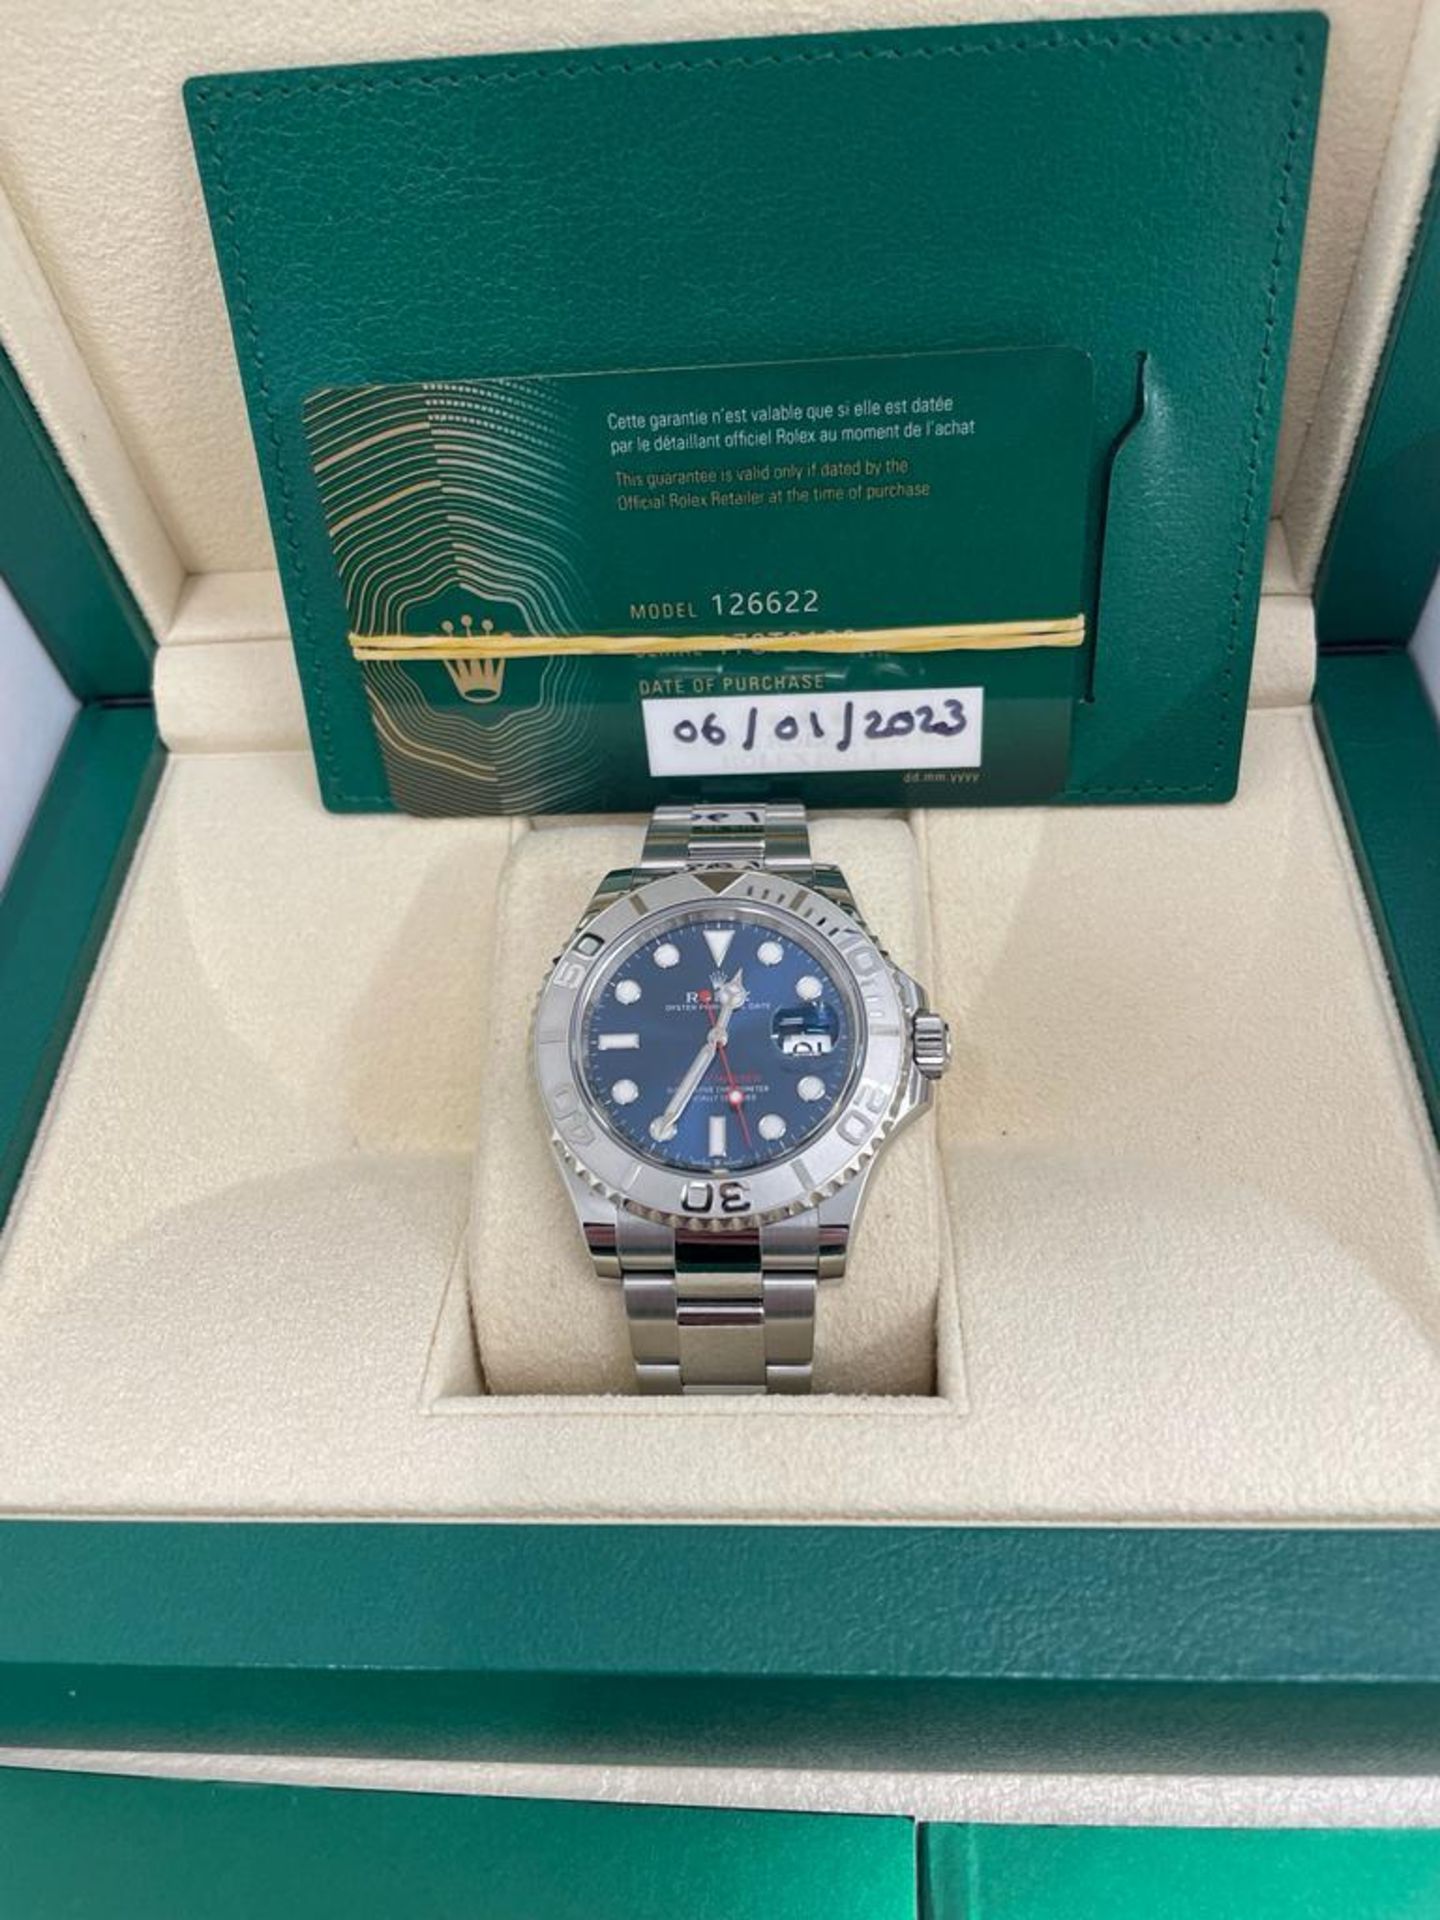 A ROLEX YACHTMASTER 40 MM WRIST WATCH WITH STAINLESS STEEL CASE AND BRACELET, SOUGHT AFTER BLUE - Image 2 of 5